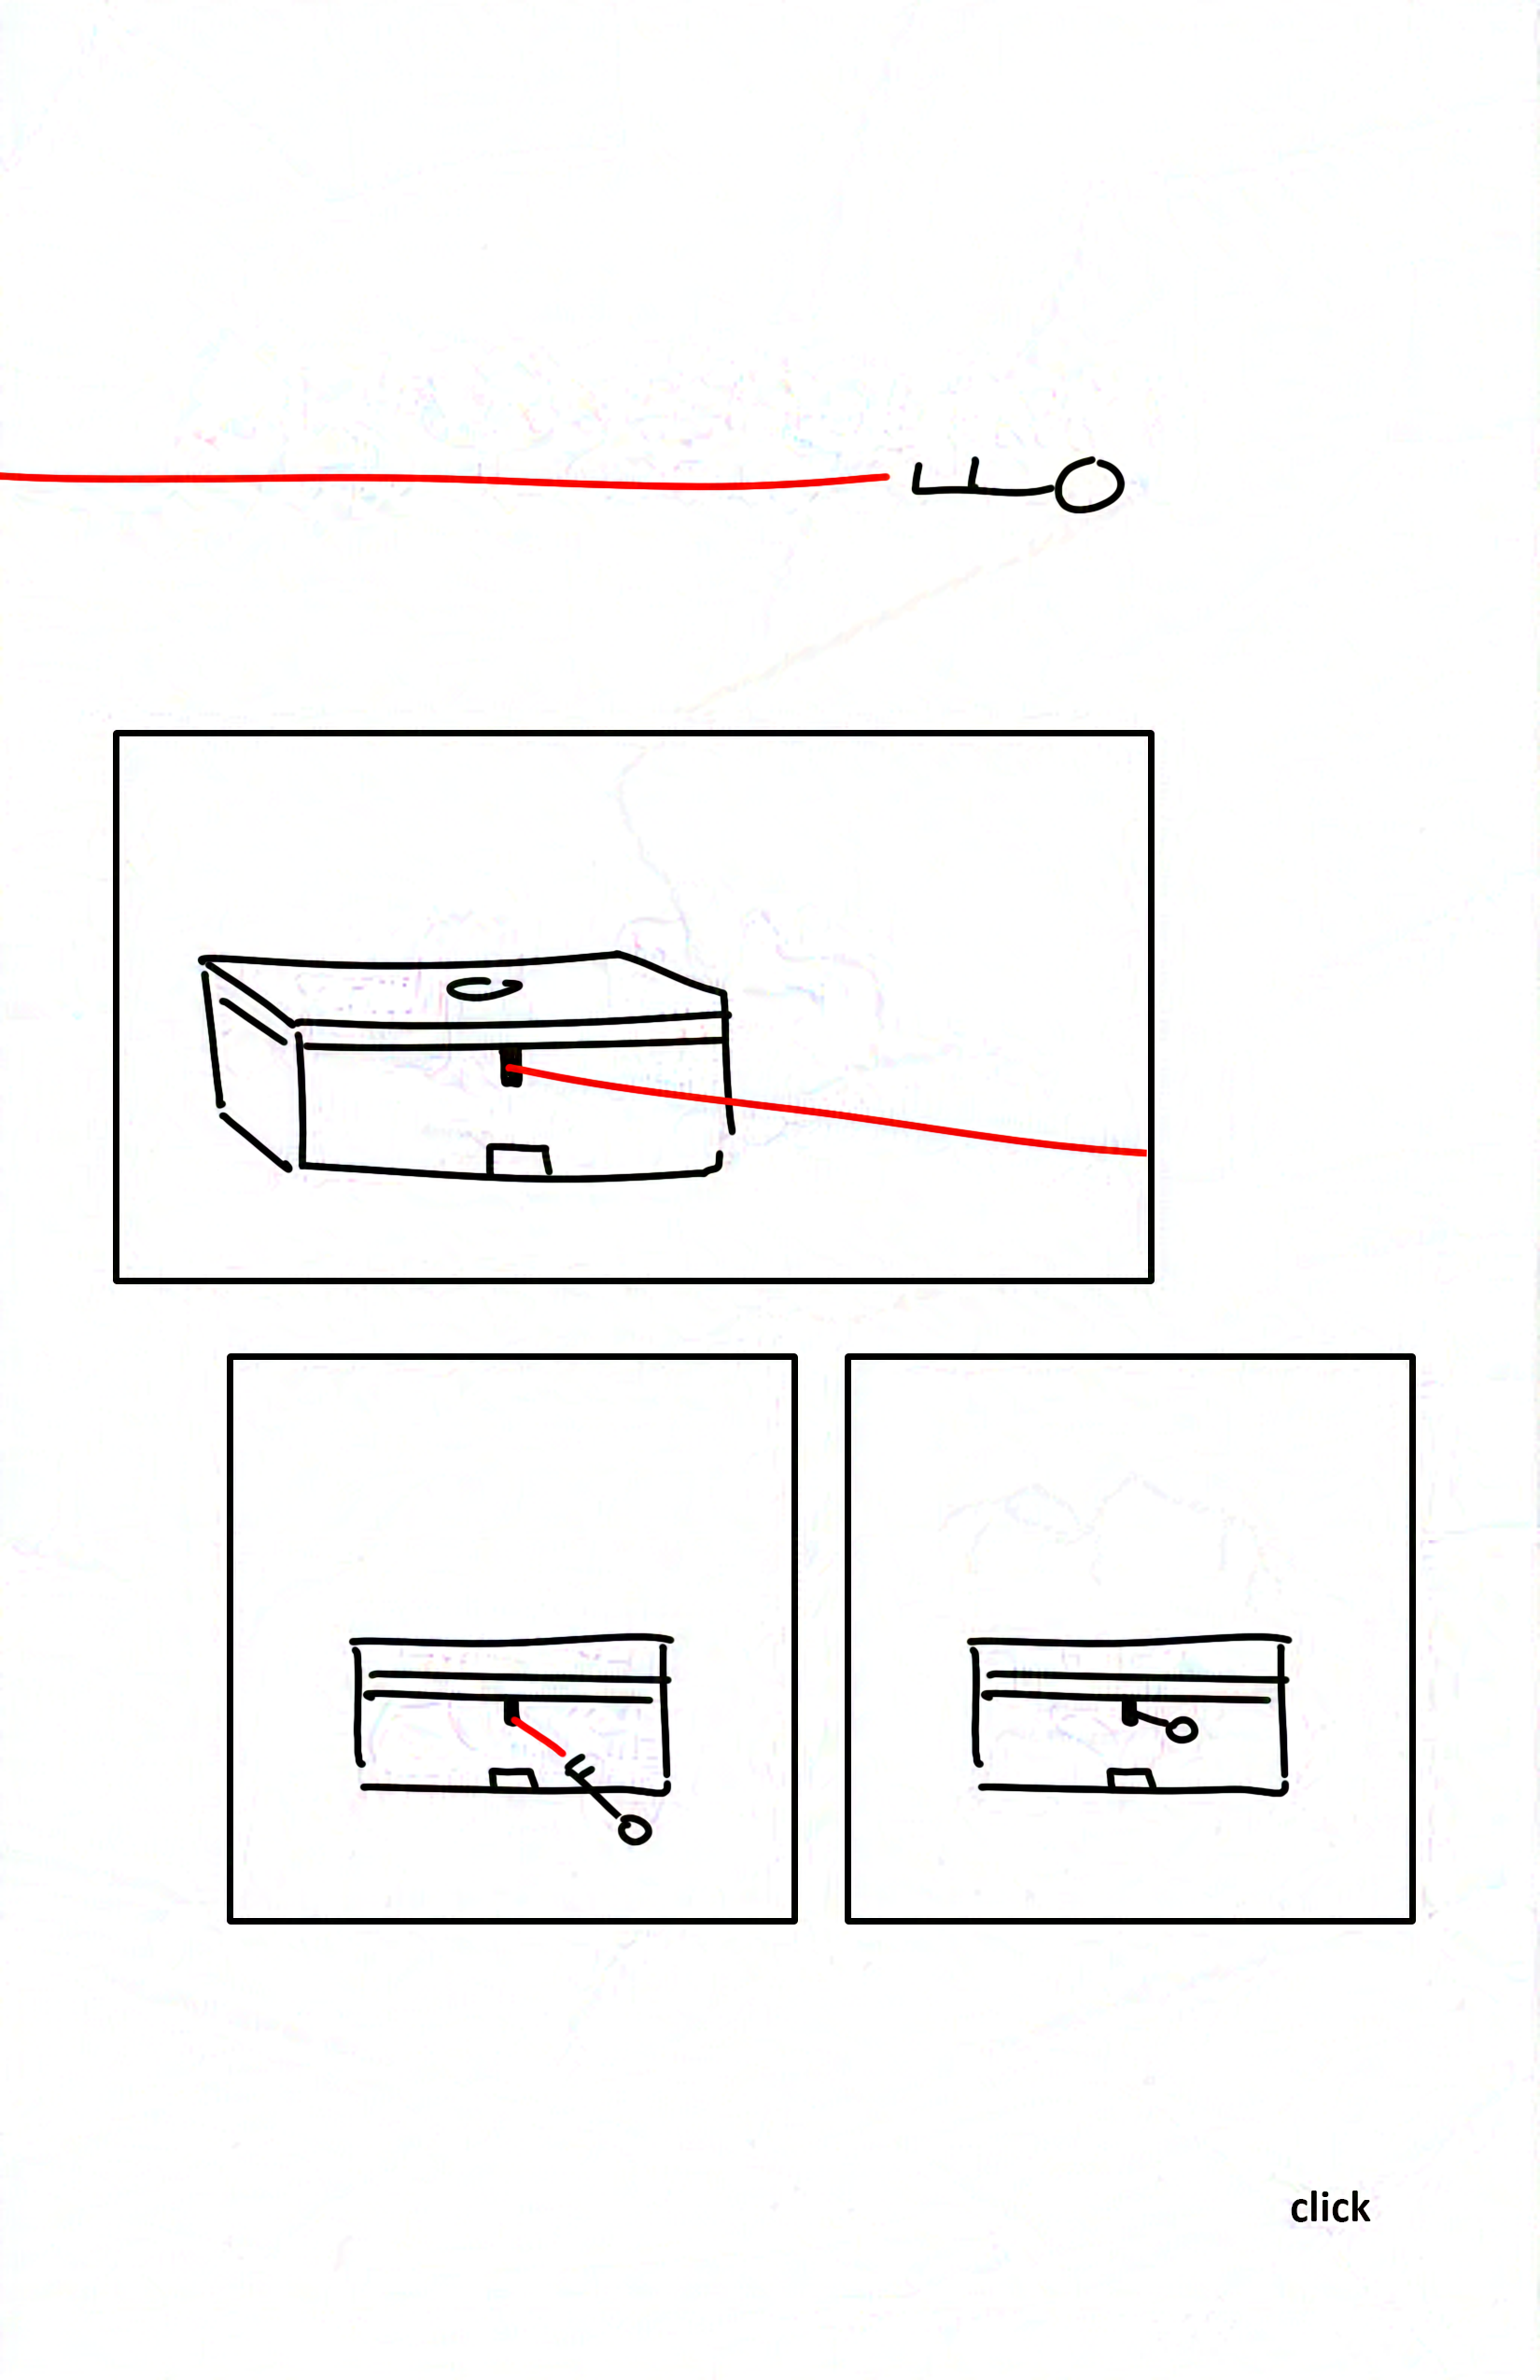 Panel 1: The key is flat on the ground being dragged by the red string to the left.
Panel 2: A closed flat box with a keyhole in the front has a taut red string emerging from it.
Panel 3: The key is attached to the same red string and approaches the box as it's being pulled.
Panel 4: The key fits into the lock as the red string disappears inside the box.
Bottom right of the page: click